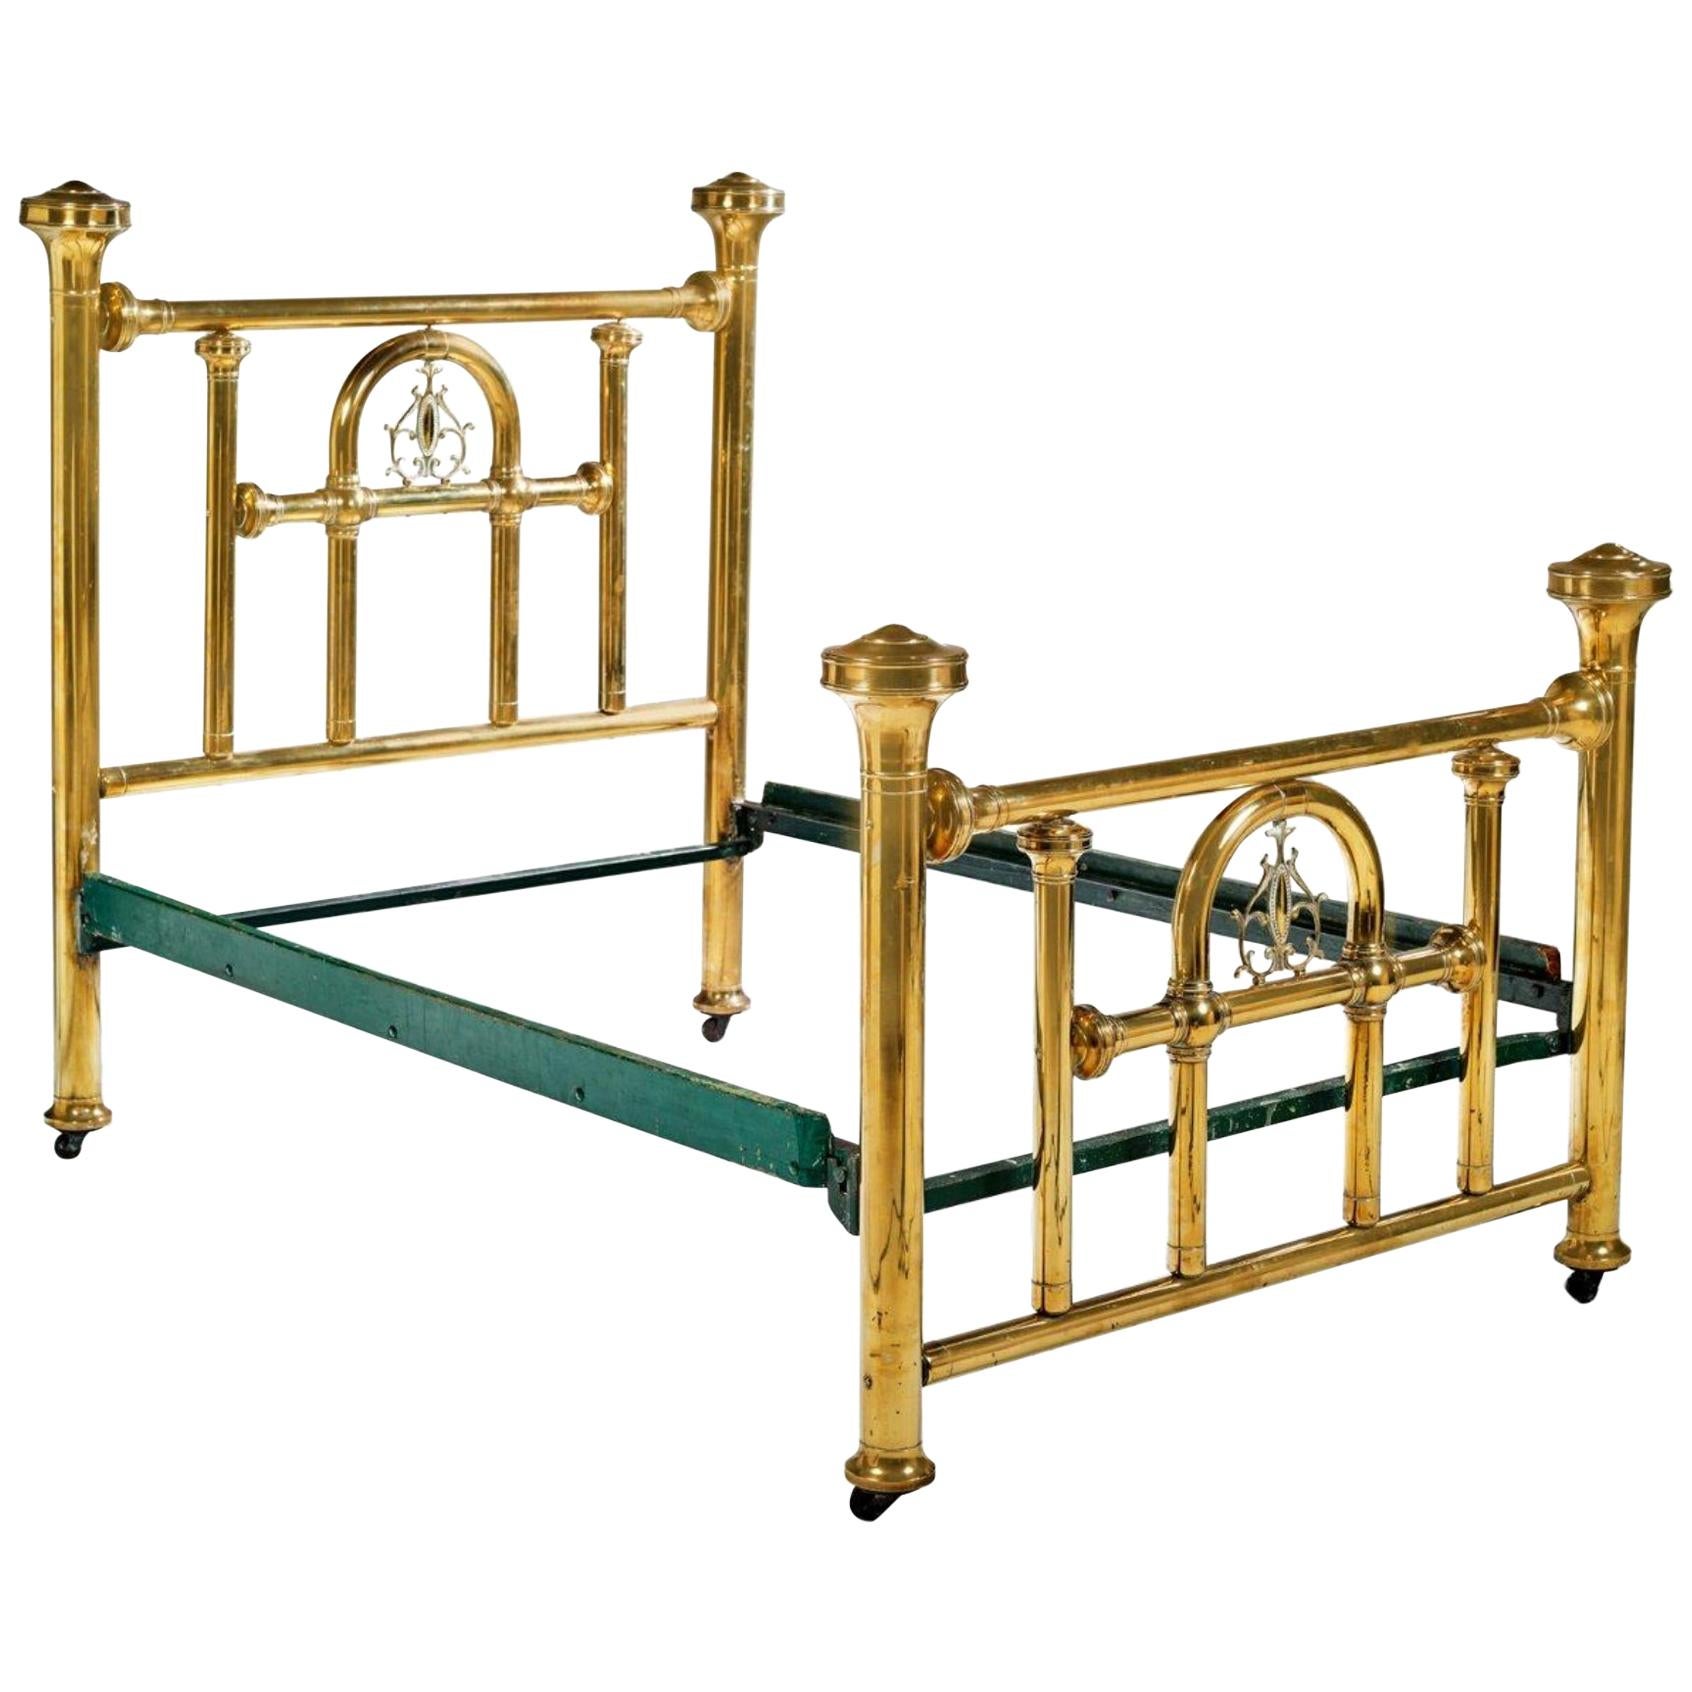 French Bed Frame of Polished Brass with Large Headboard, circa 1900